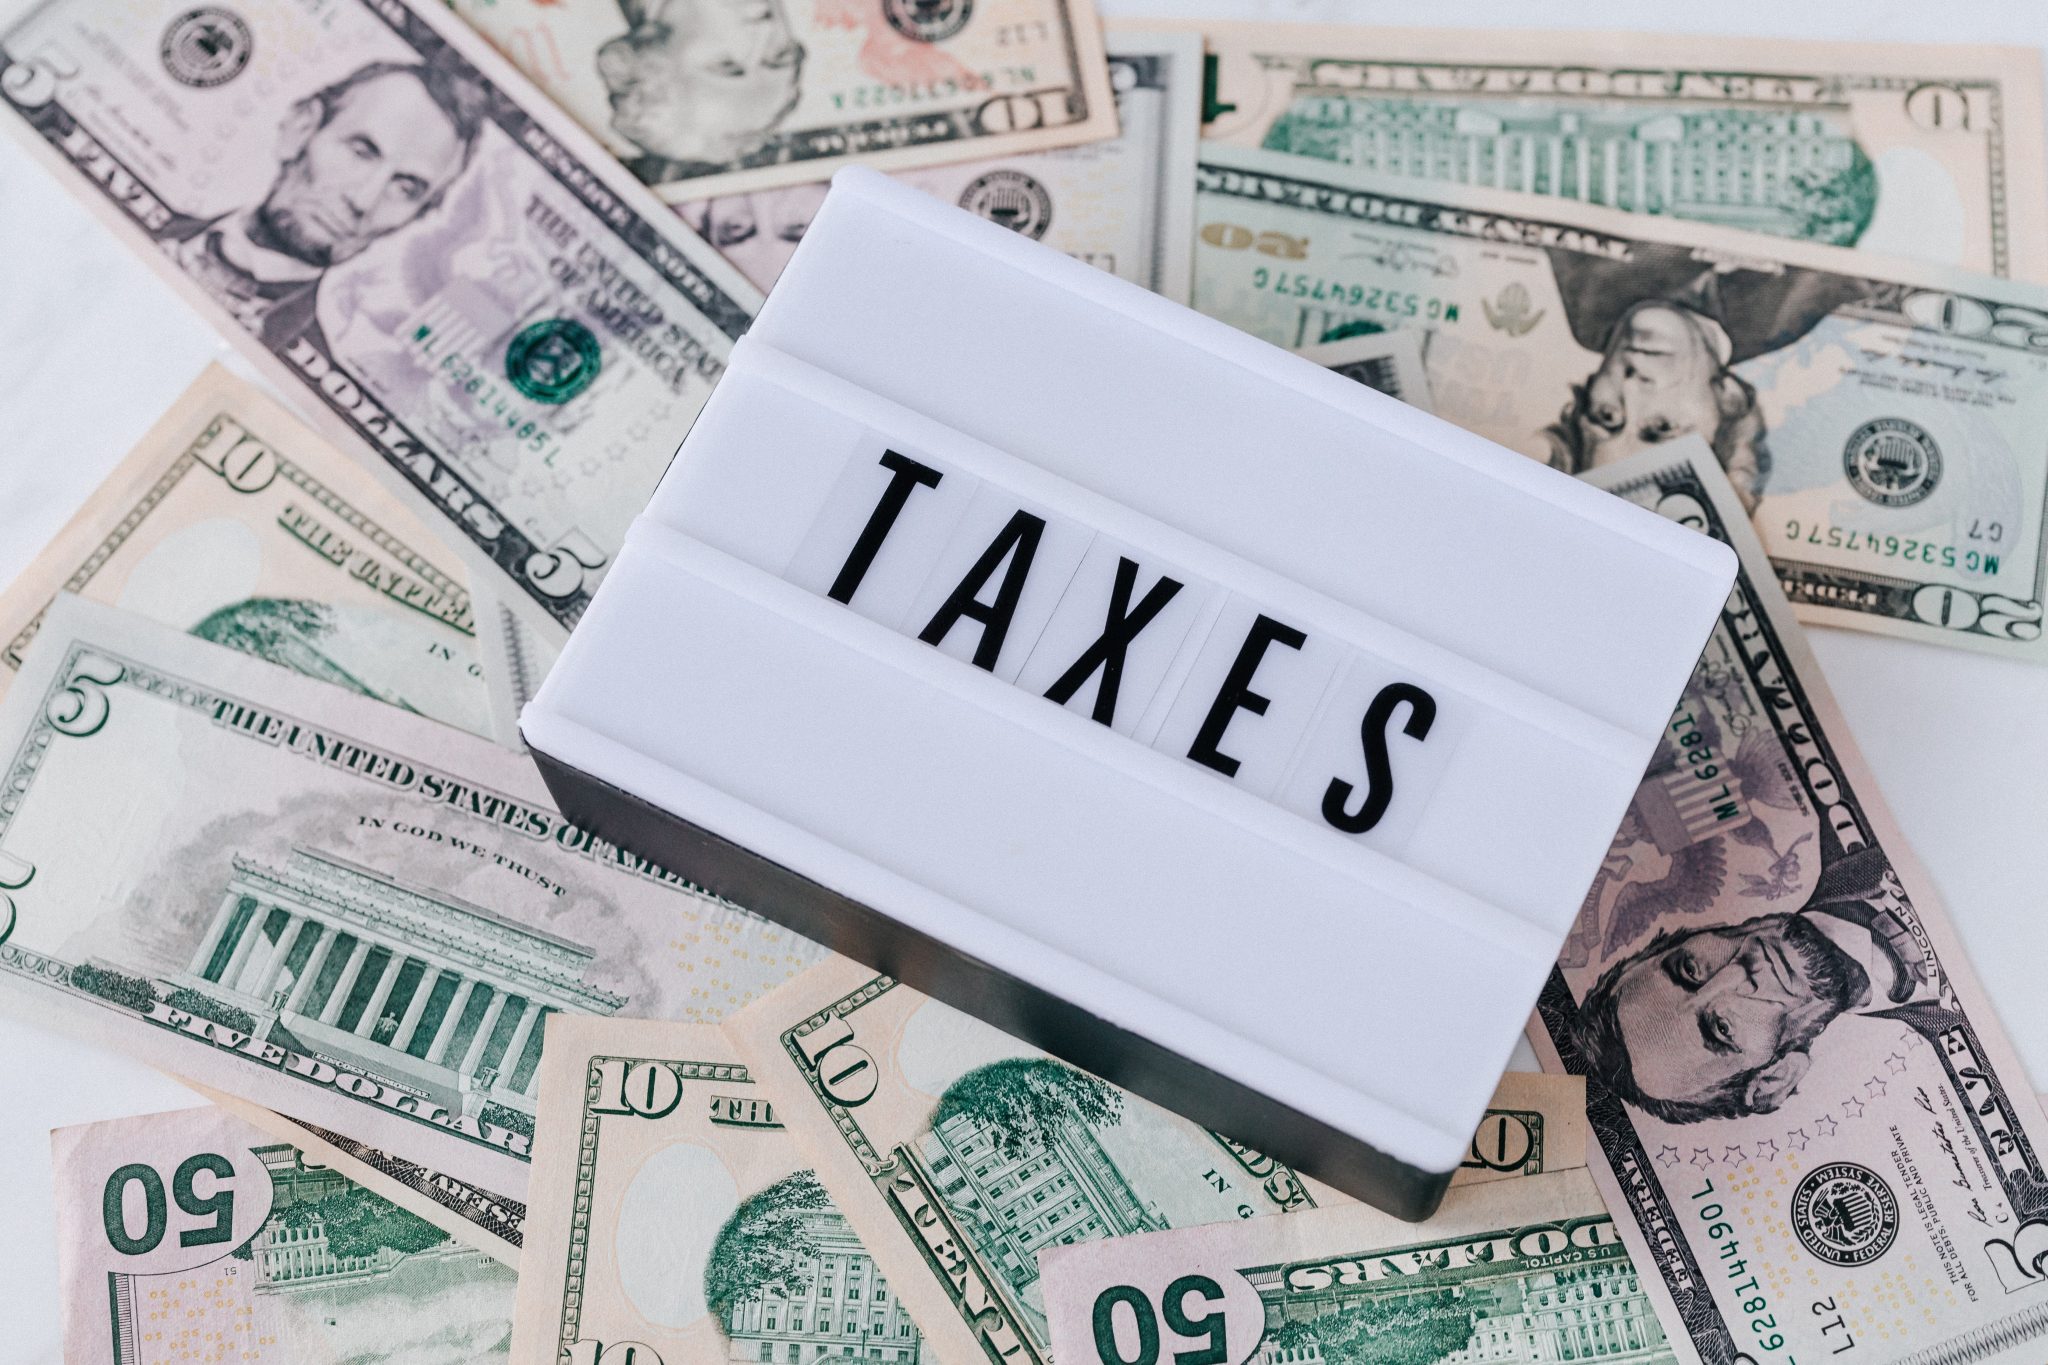 The word "taxes" on a white background laid on top of several bills of US currency